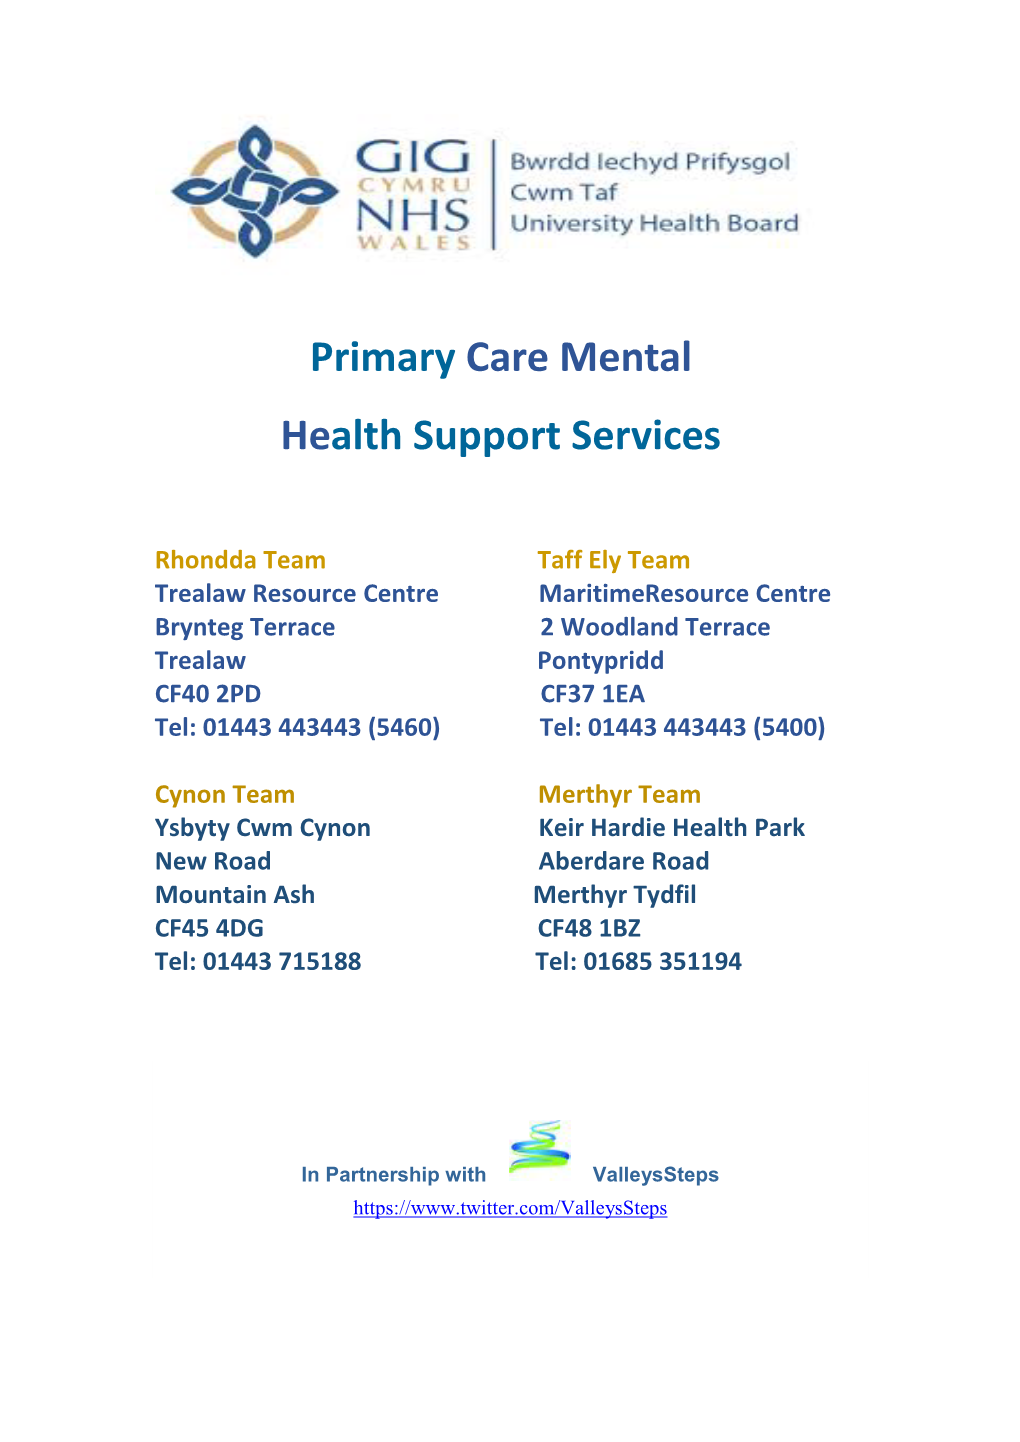 Primary Care Mental Health Support Services